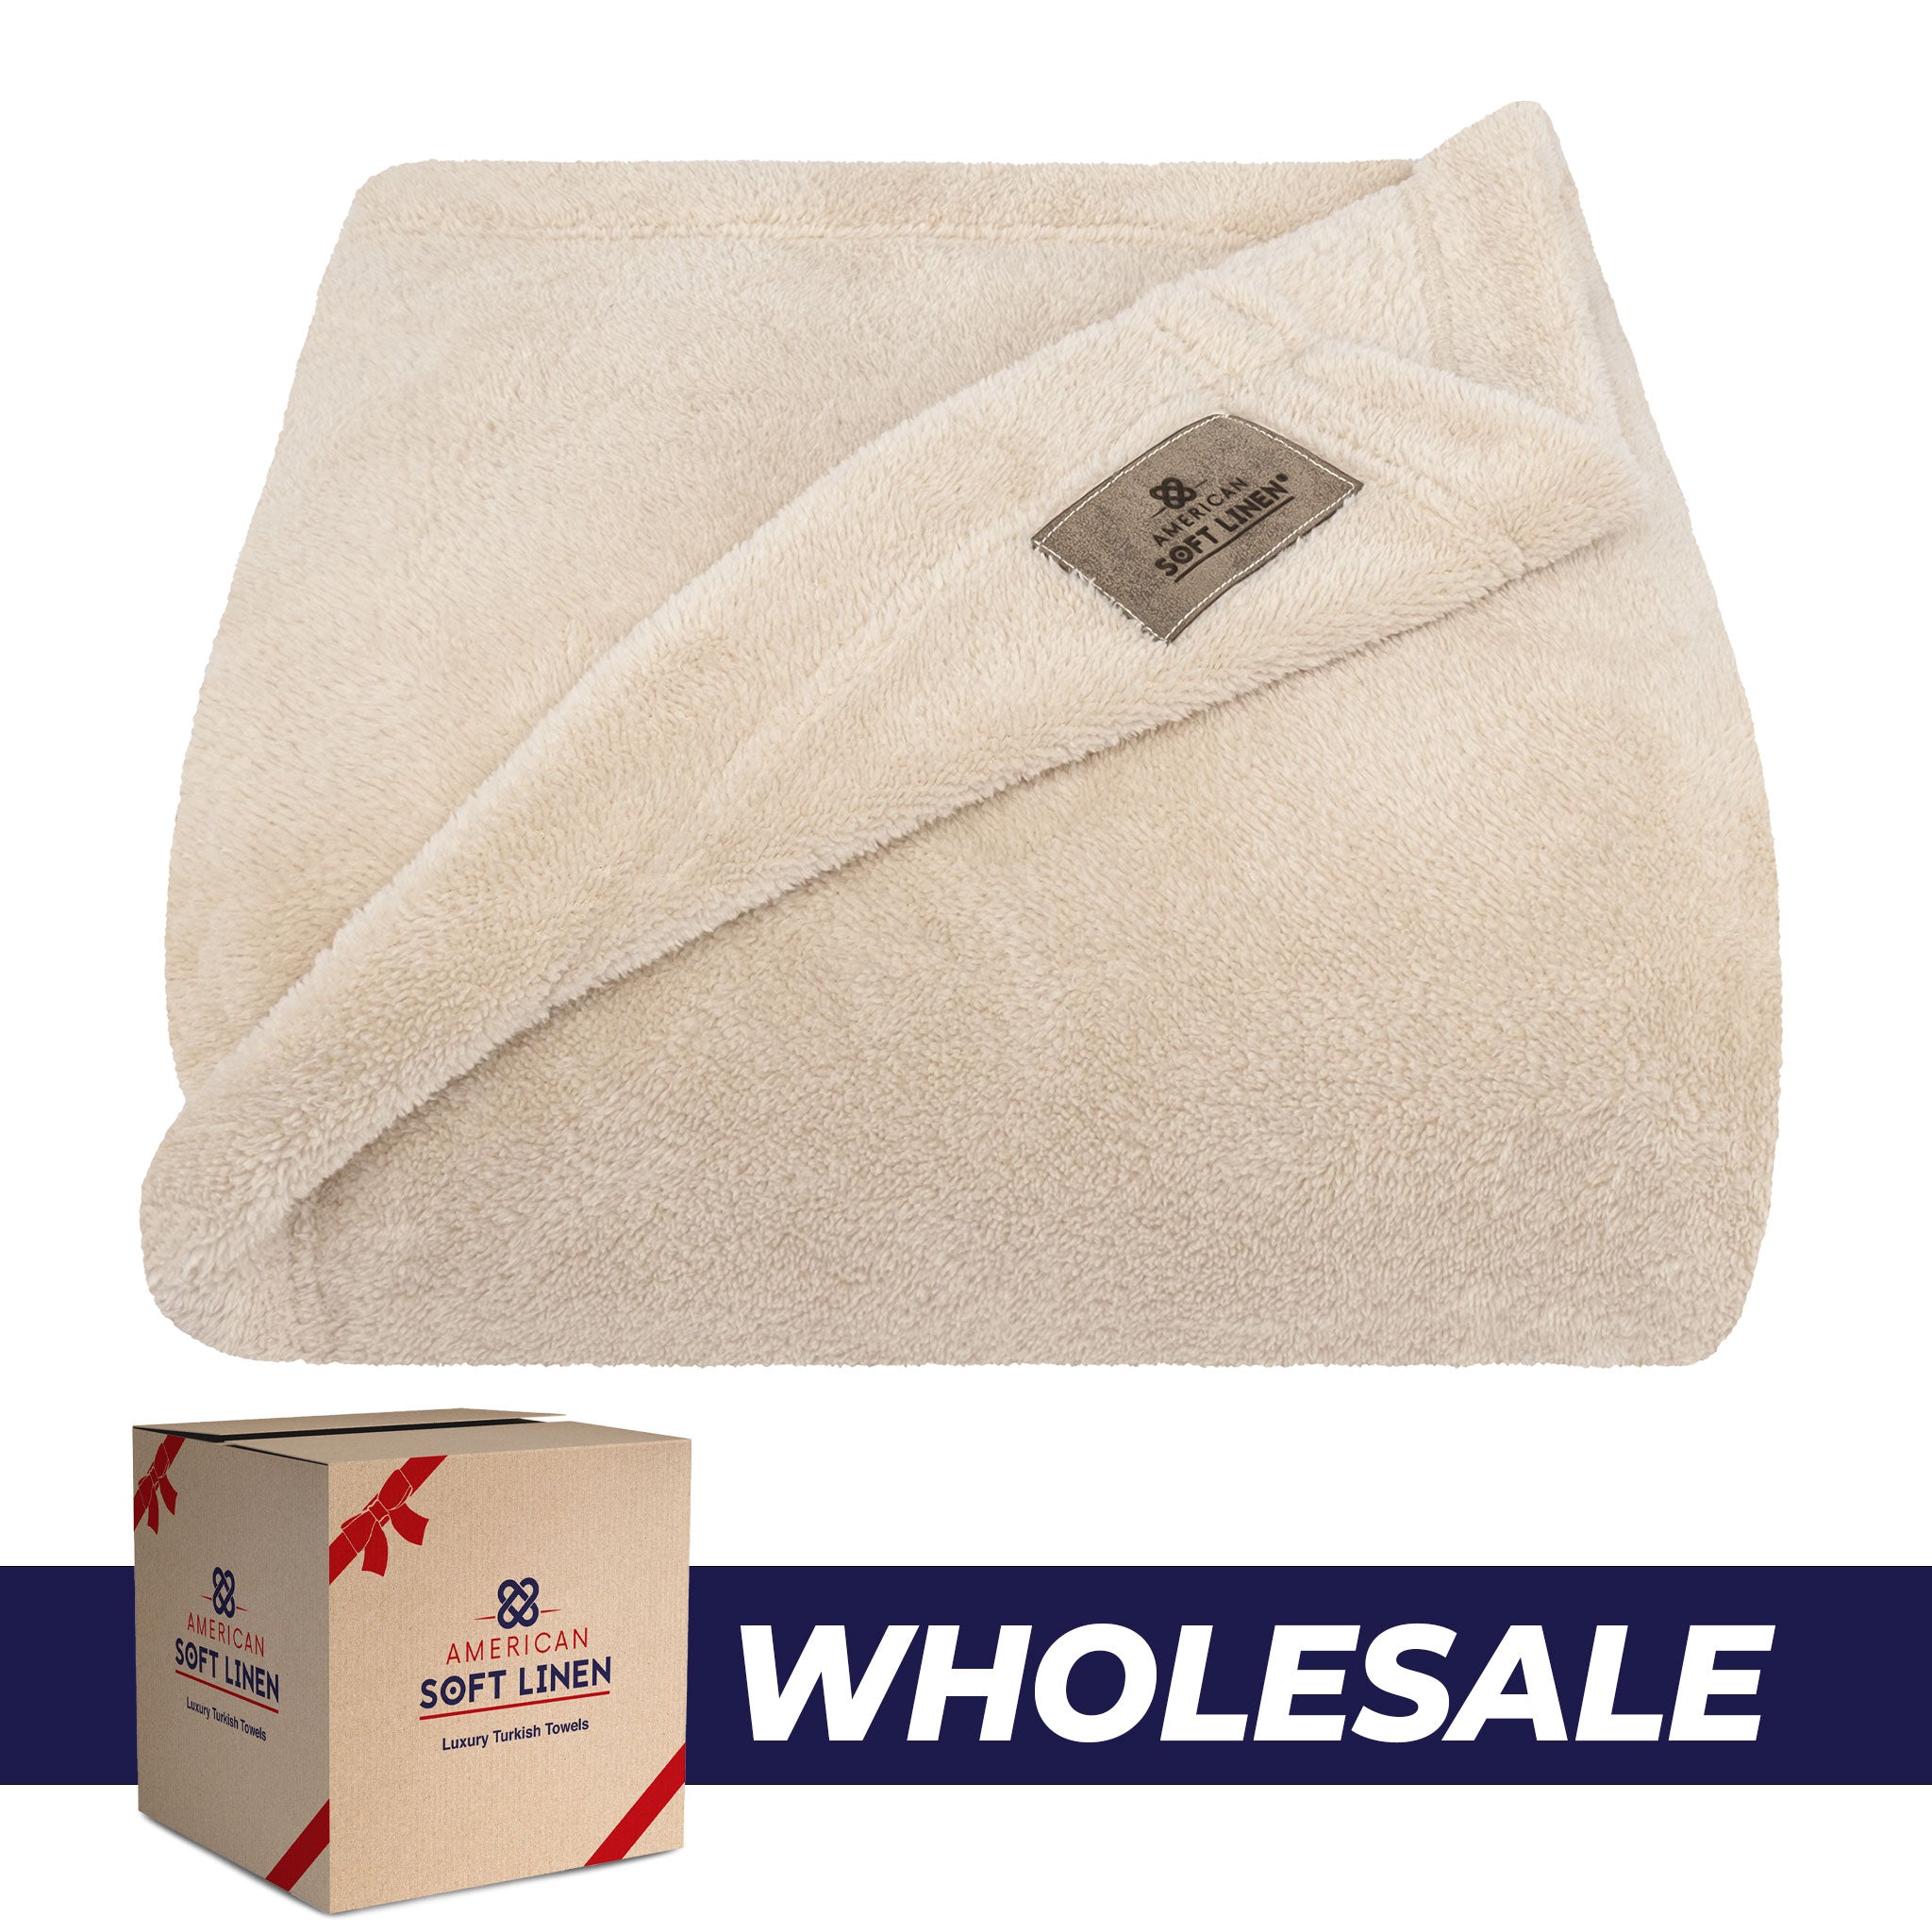 American Soft Linen - Bedding Fleece Blanket - Wholesale - 15 Set Case Pack - Twin Size 60x80 inches - Sand-Taupe - 0